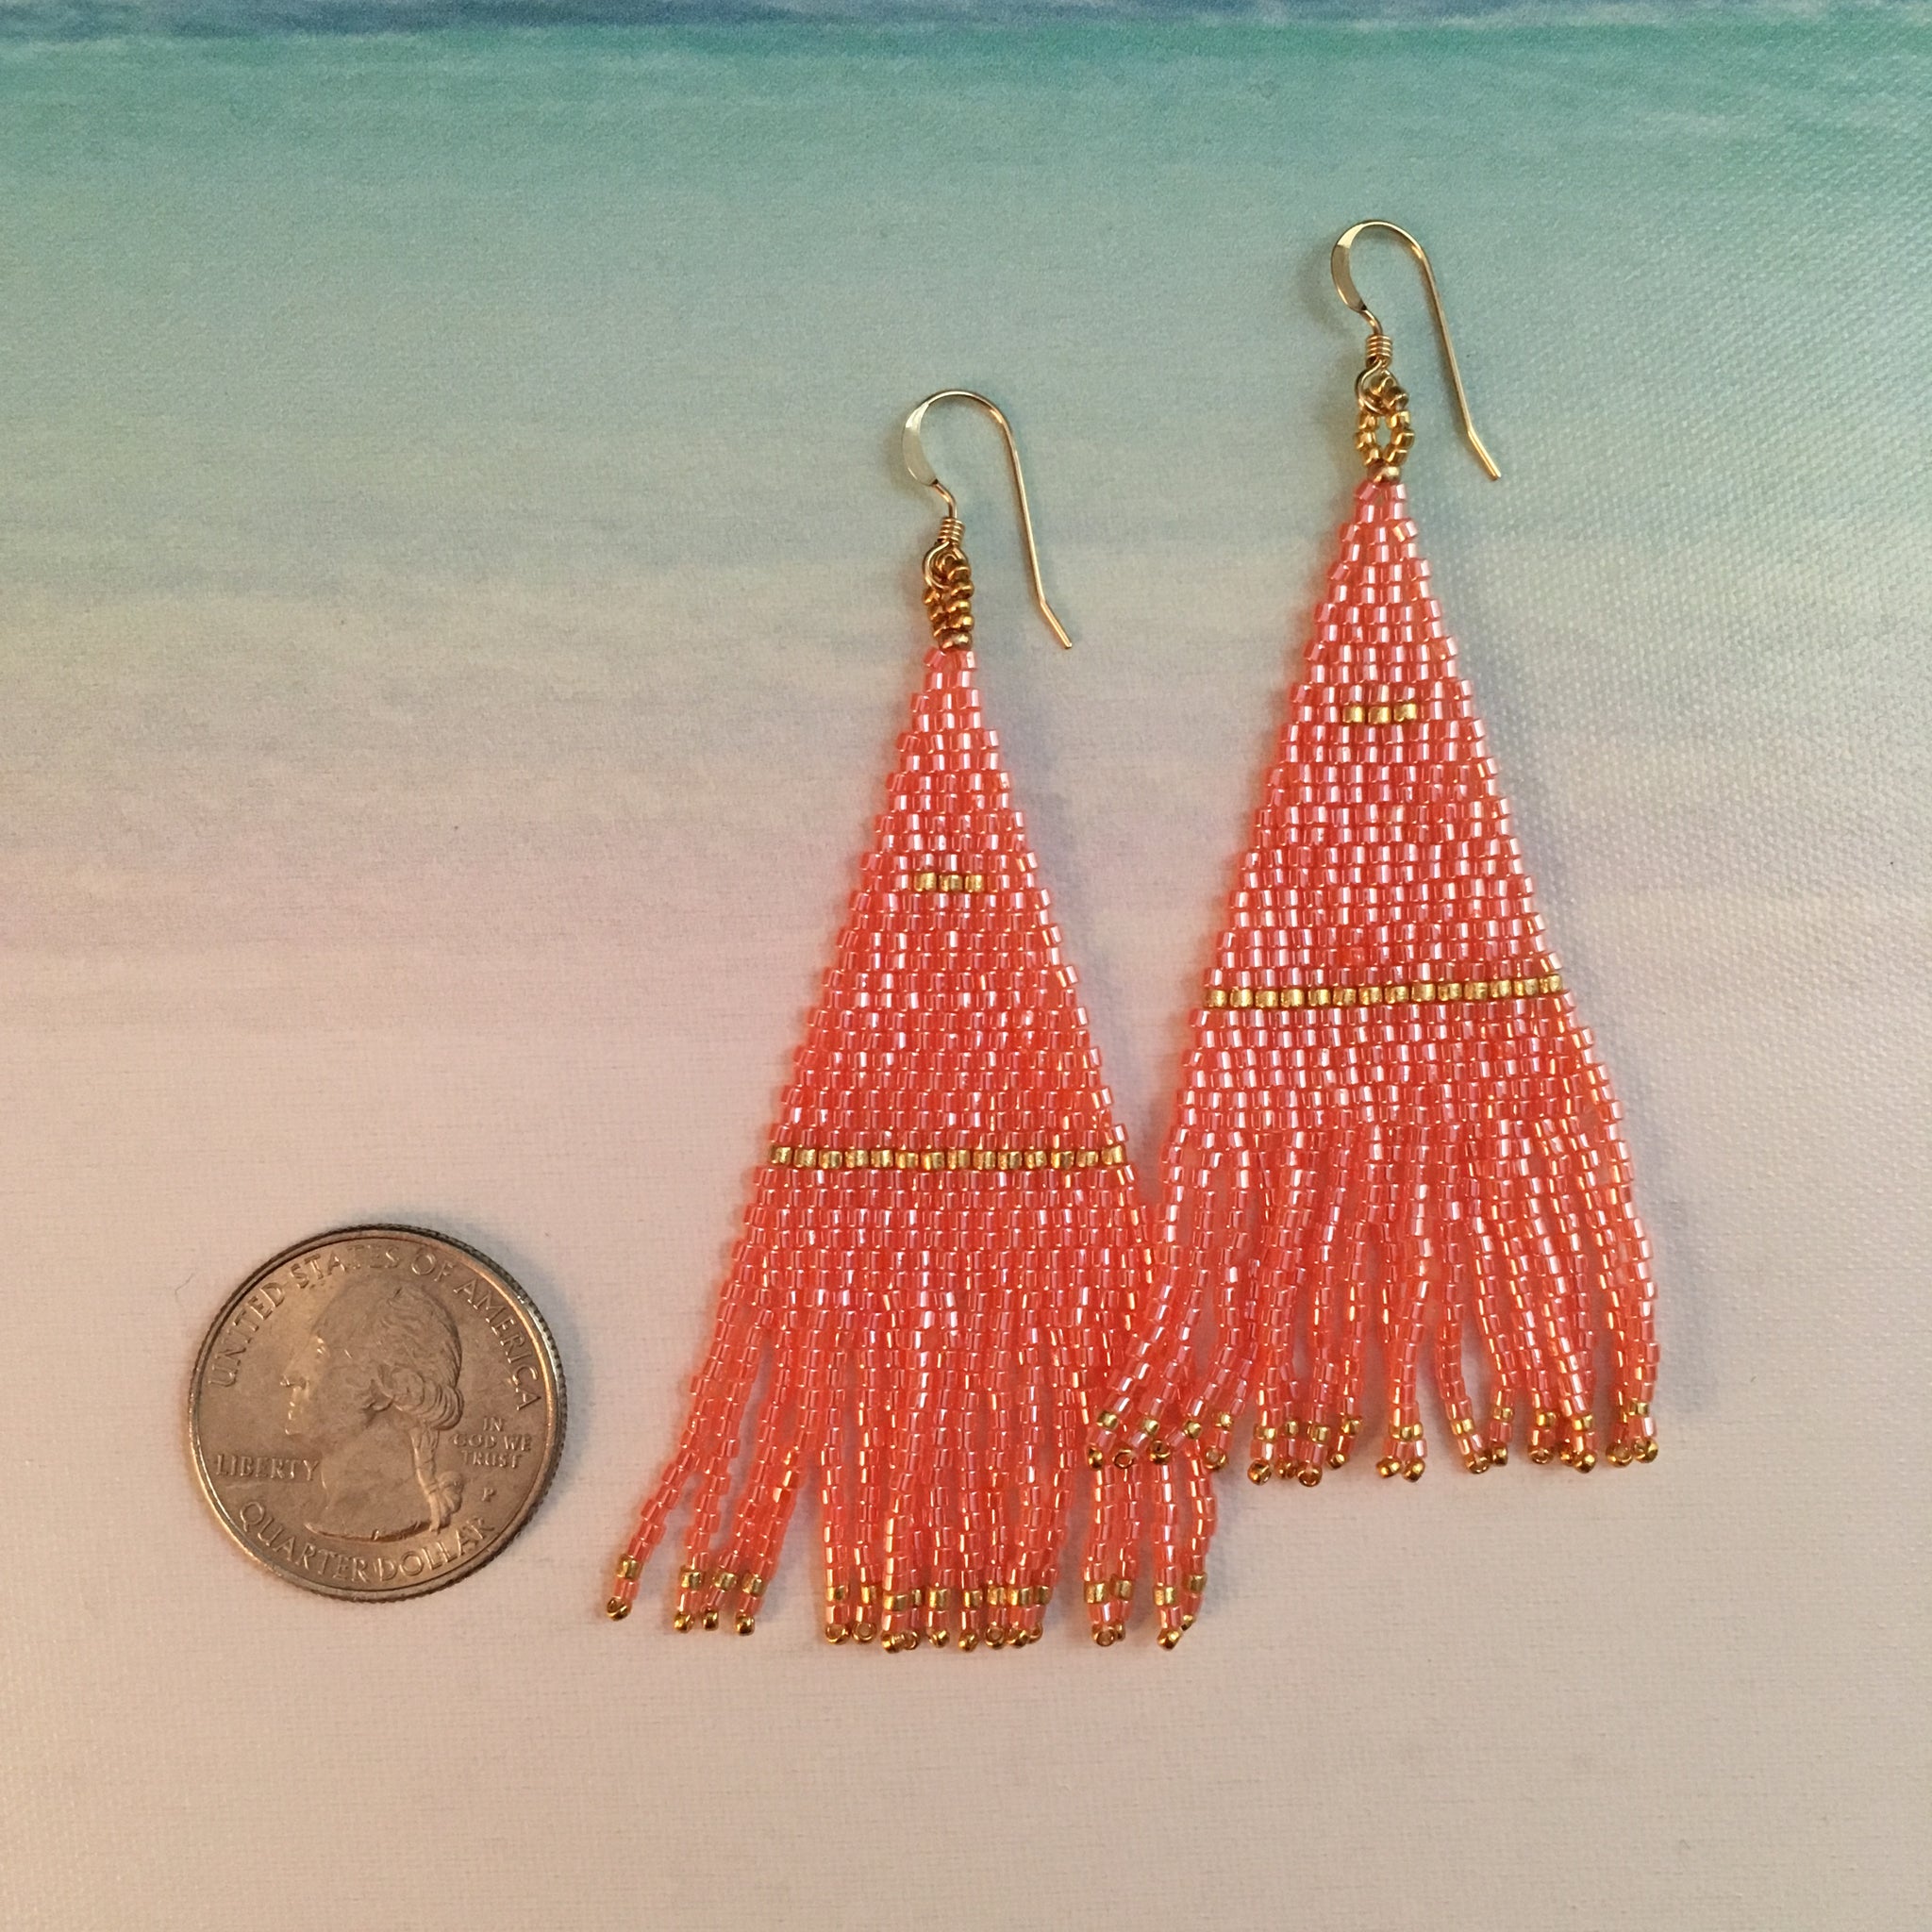 Beaded Tassel Fringe Earrings in Coral Peach and Gold